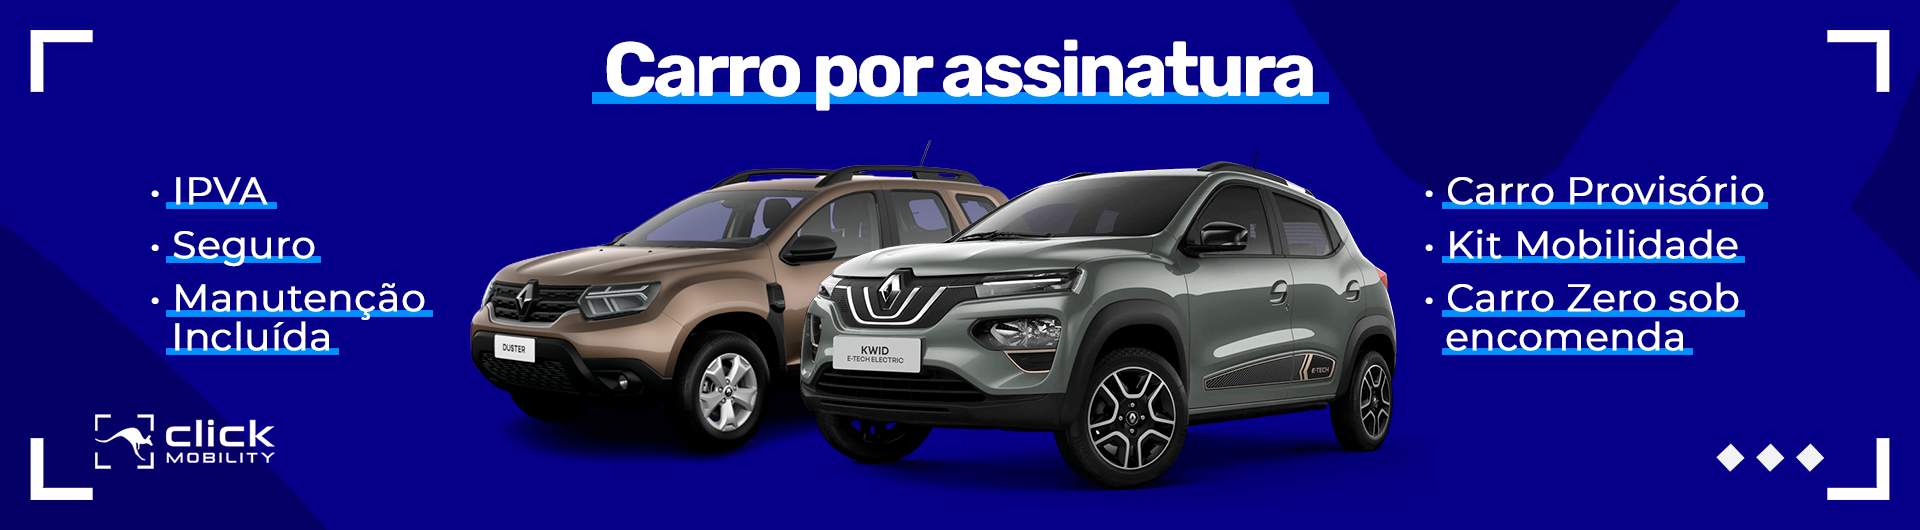 CLICK KWID OUTSIDER - RENAULT - LEAUTO